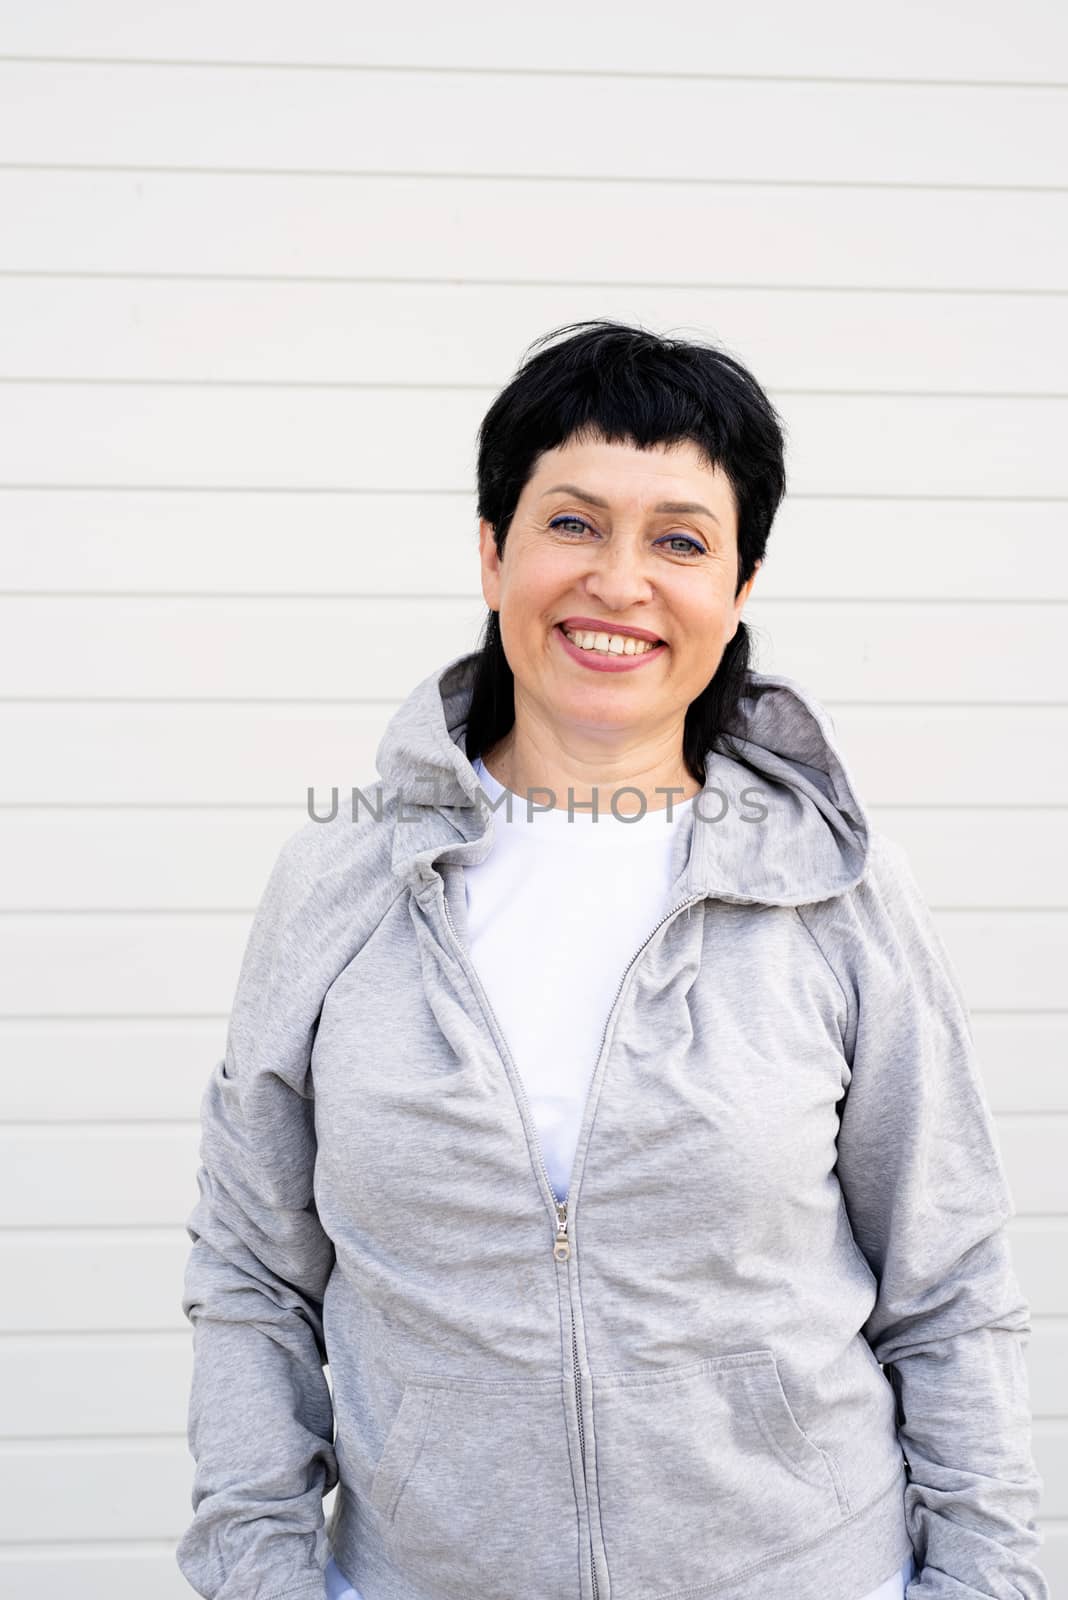 Sport and fitness. Senior sport. Active seniors. Senior woman waring gray jacket standing outdoors on gray solid background